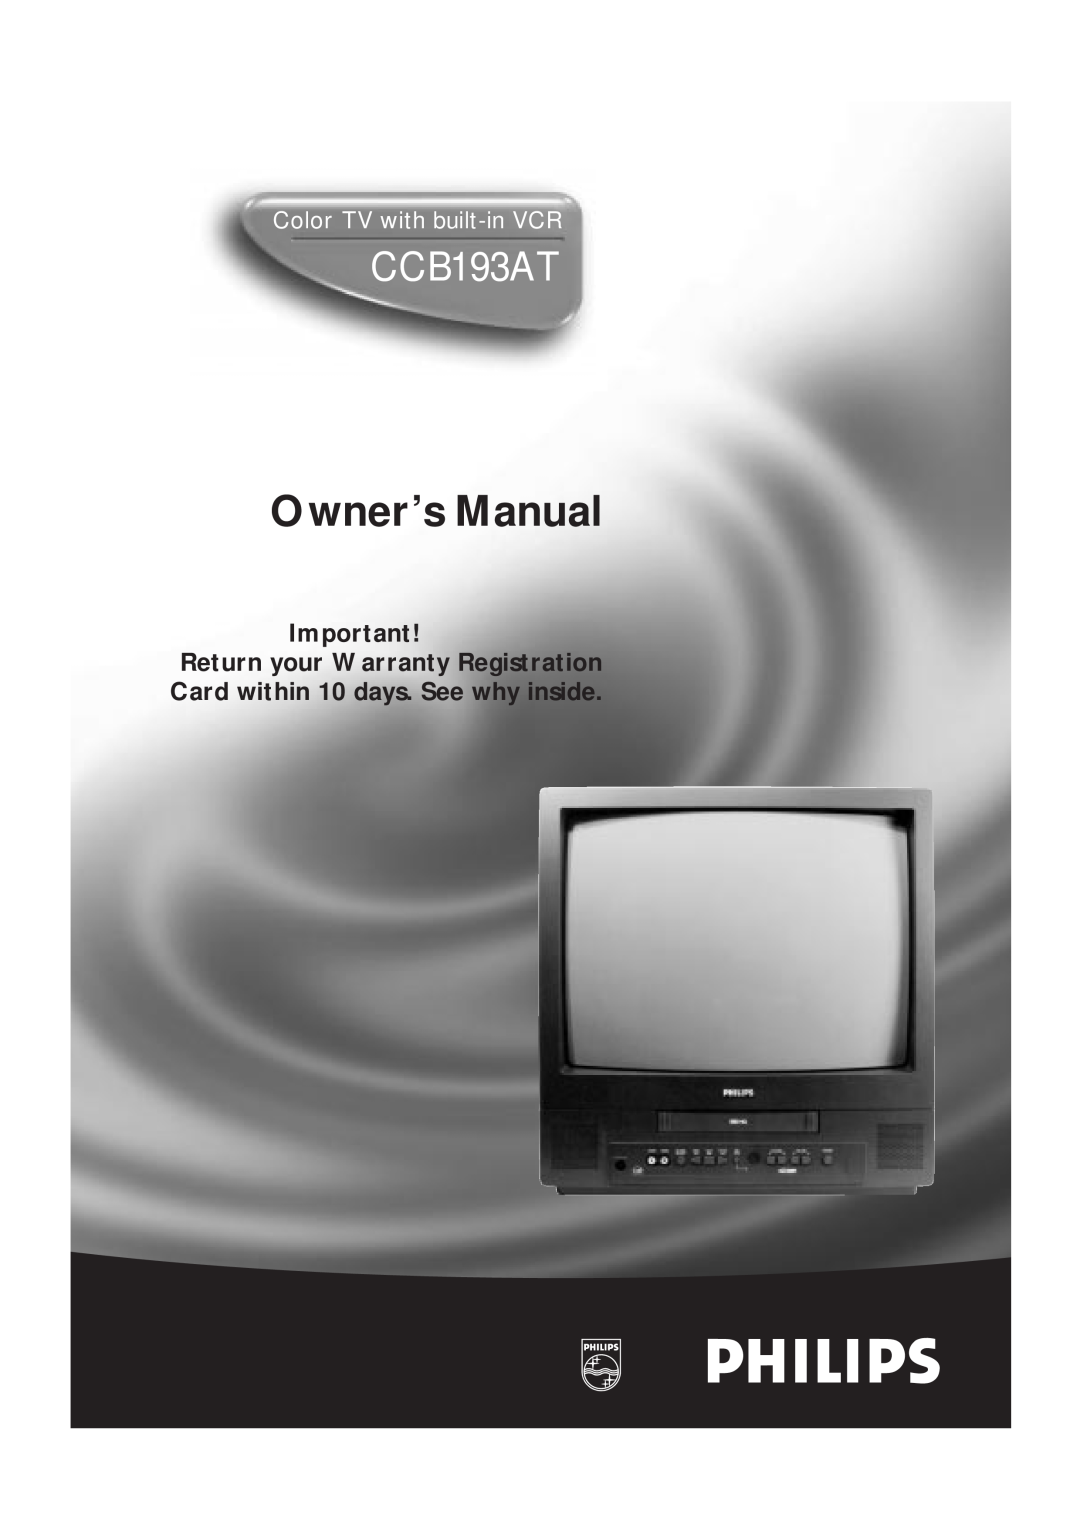 Magnavox CCB193AT owner manual Color TV with built-in VCR 